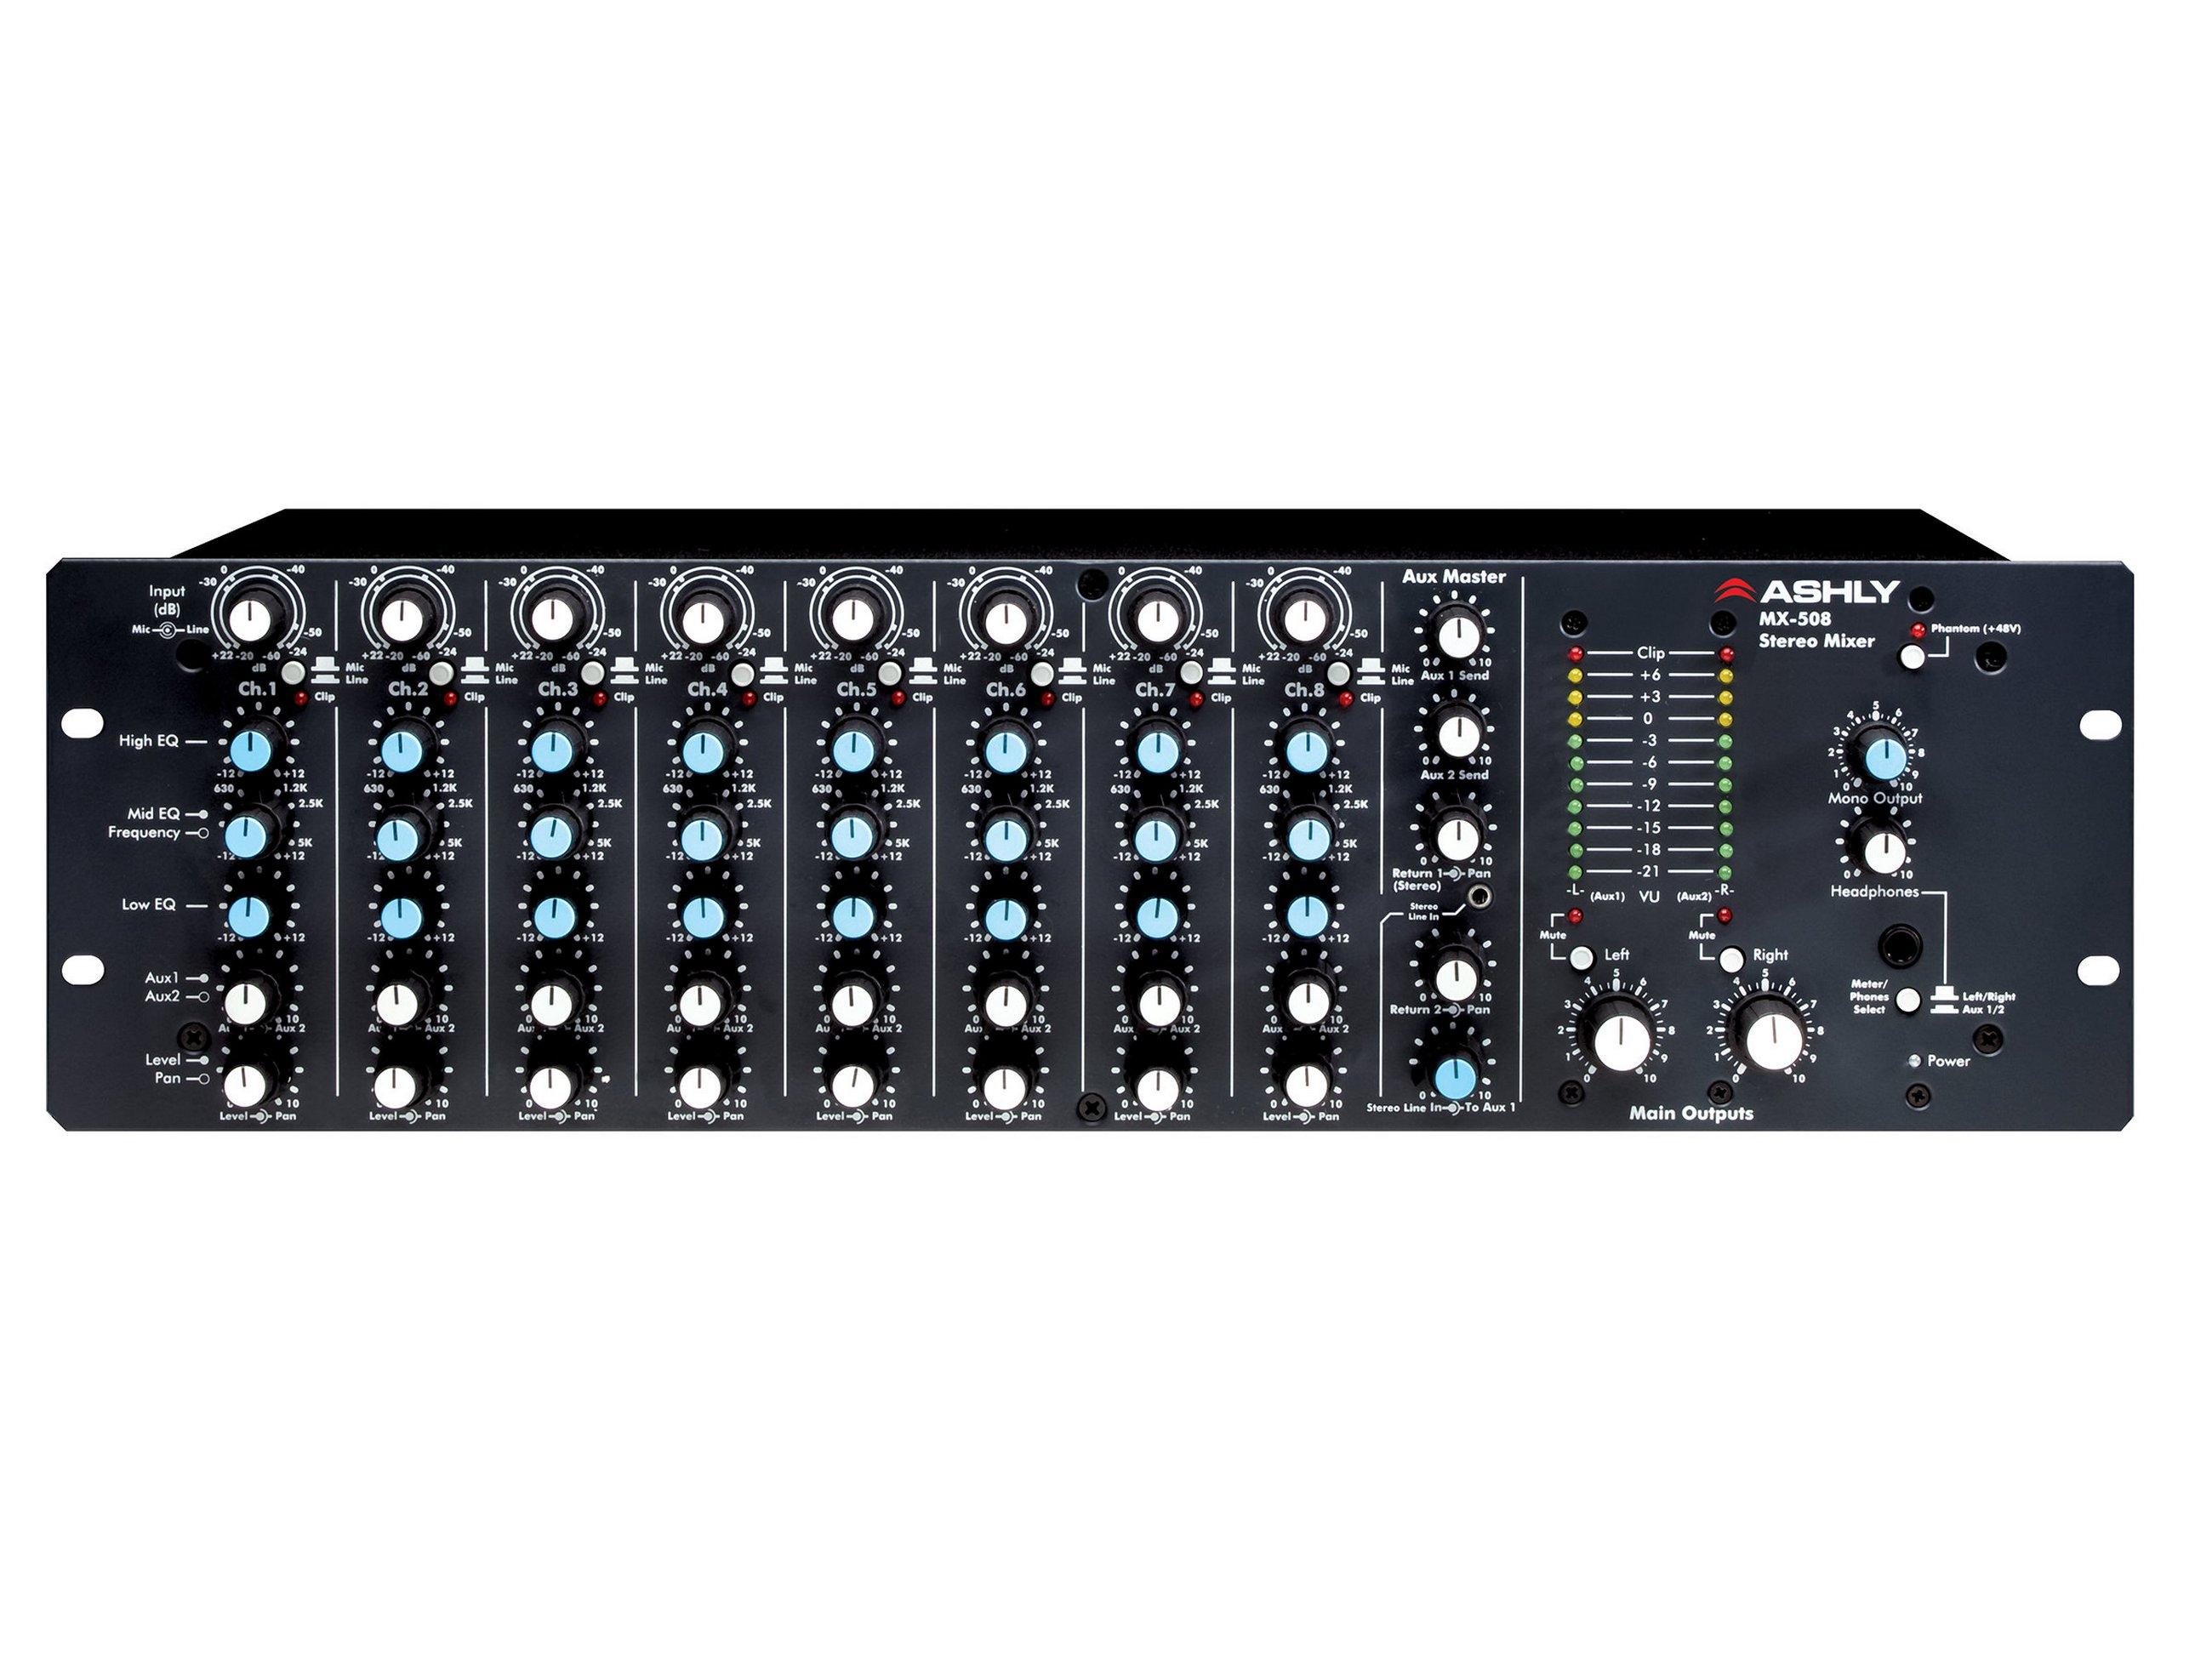 MX-508 Mixer 8 Input Stereo with EQ and Sends/3U by Ashly